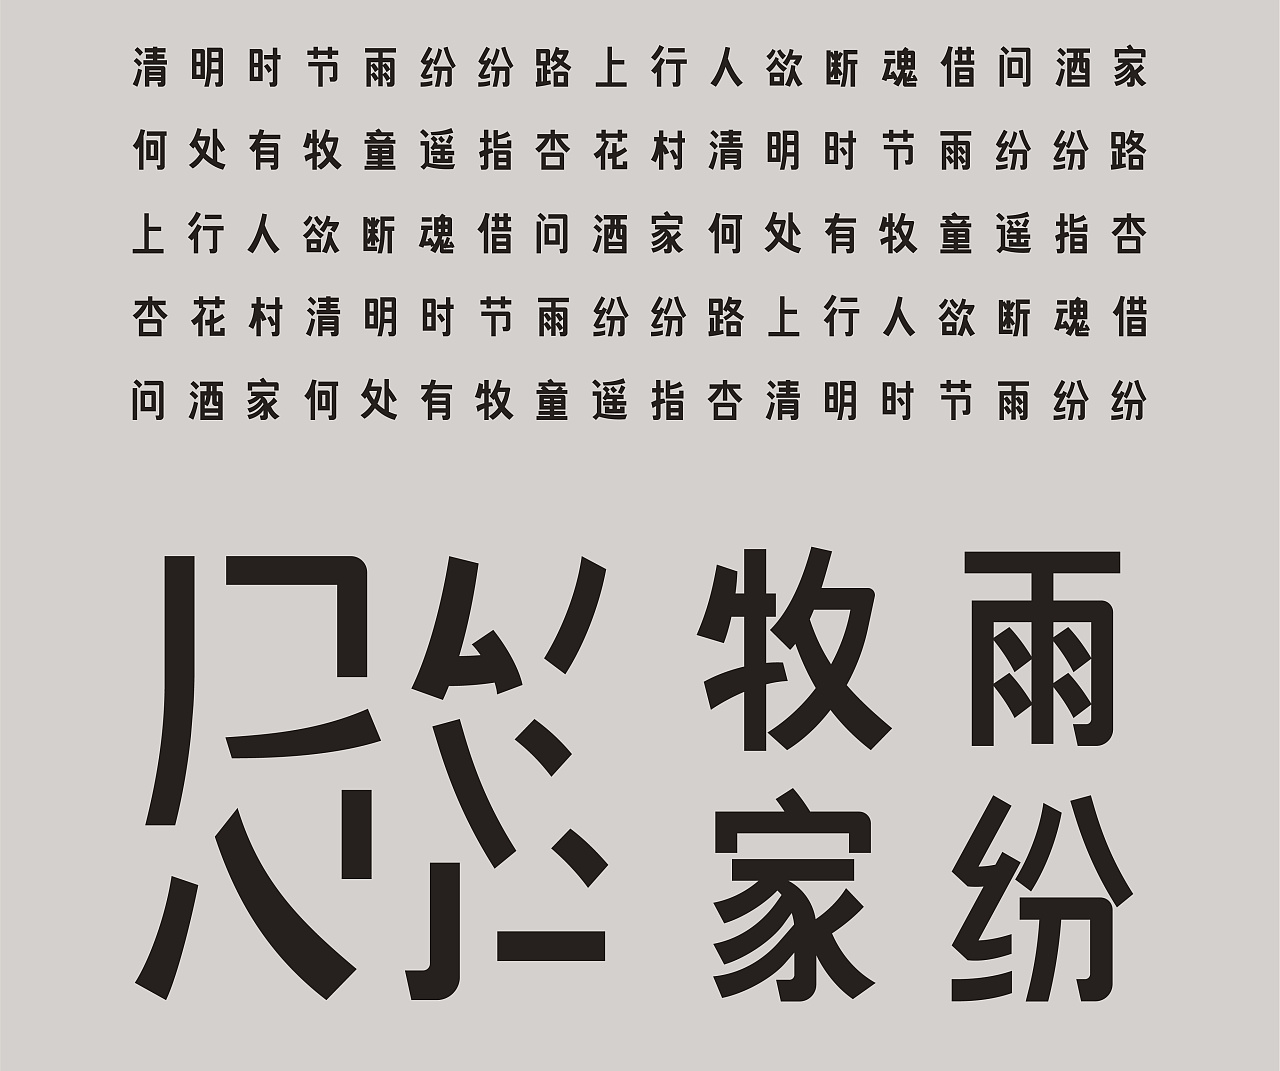 Chinese Creative Font Design-Appreciation of Ancient Poetry Design in Qingming